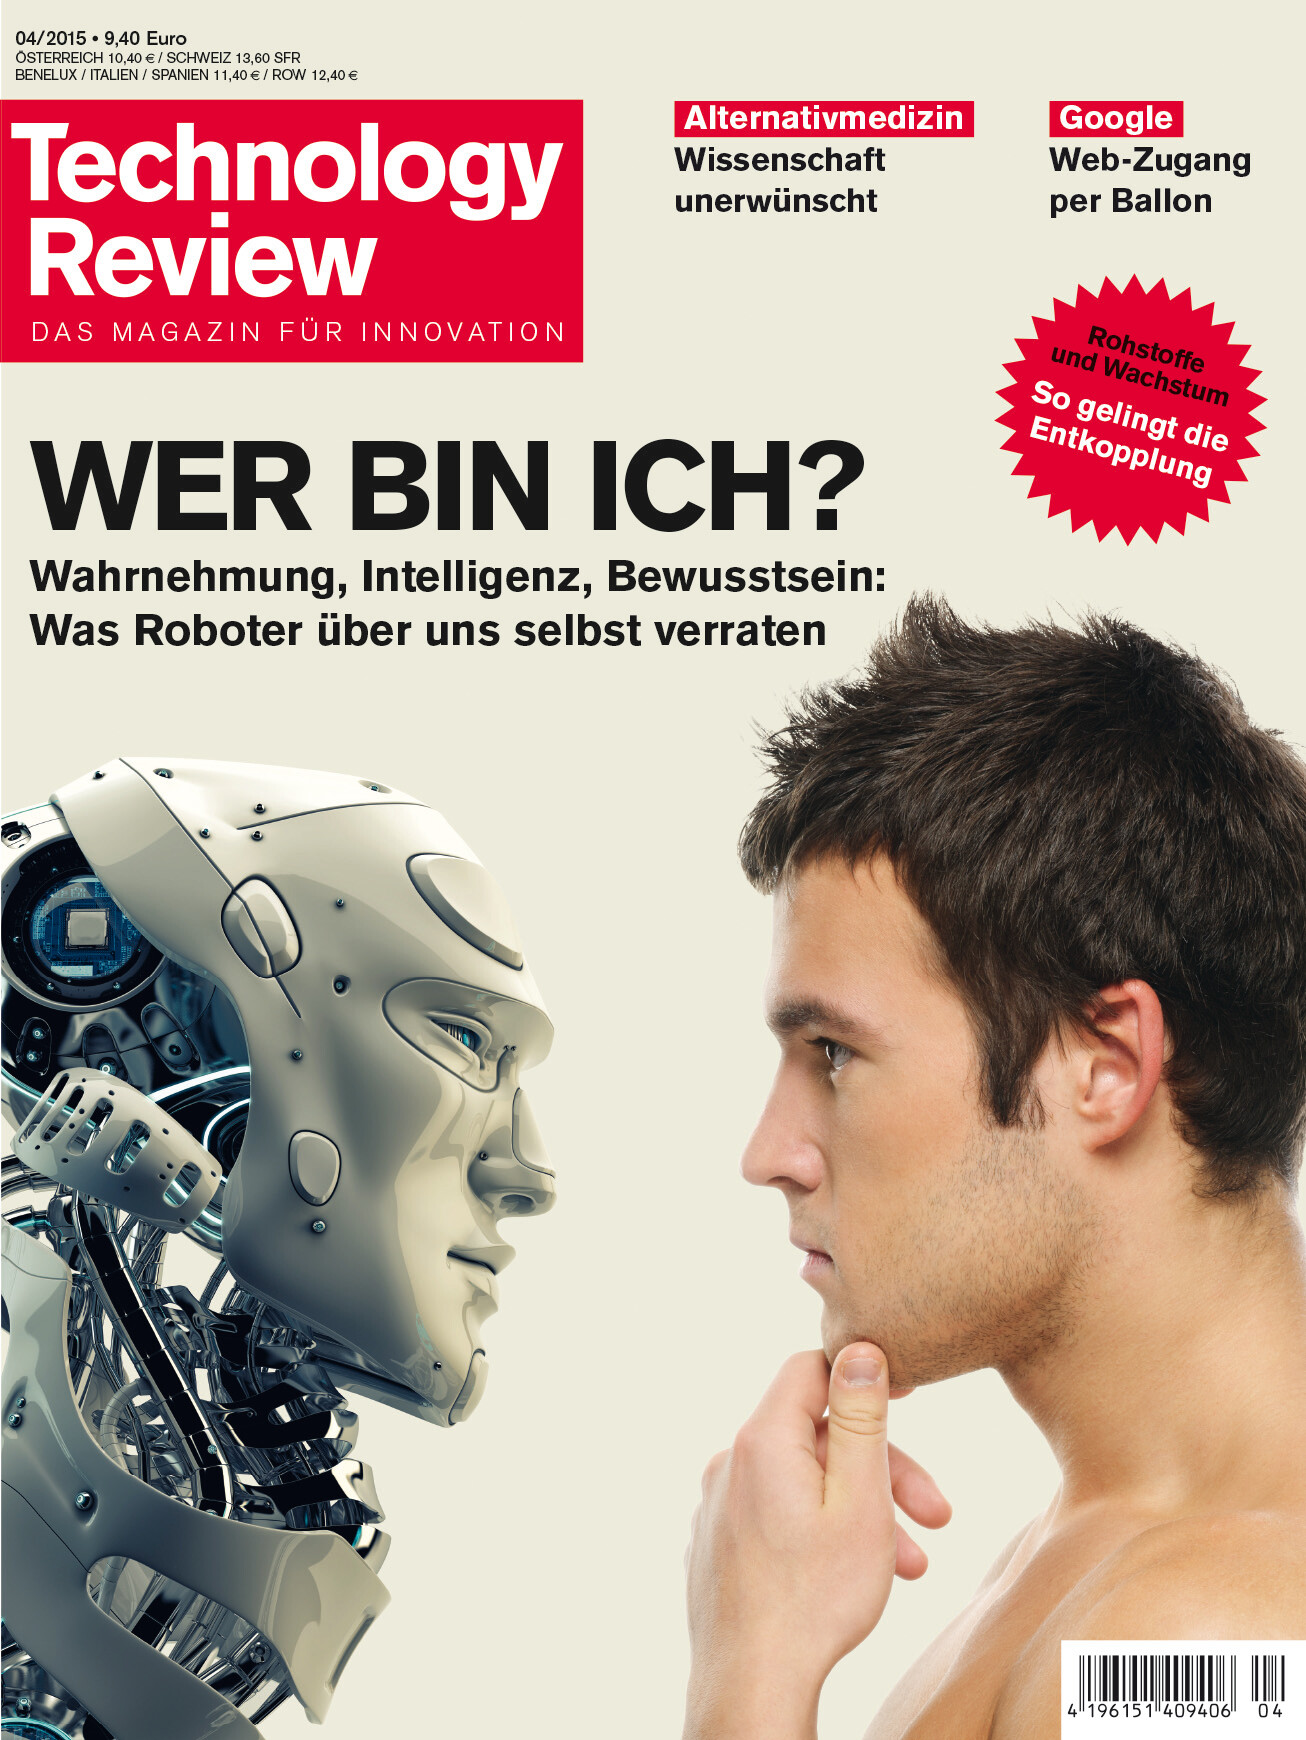 Technology Review 04/2015